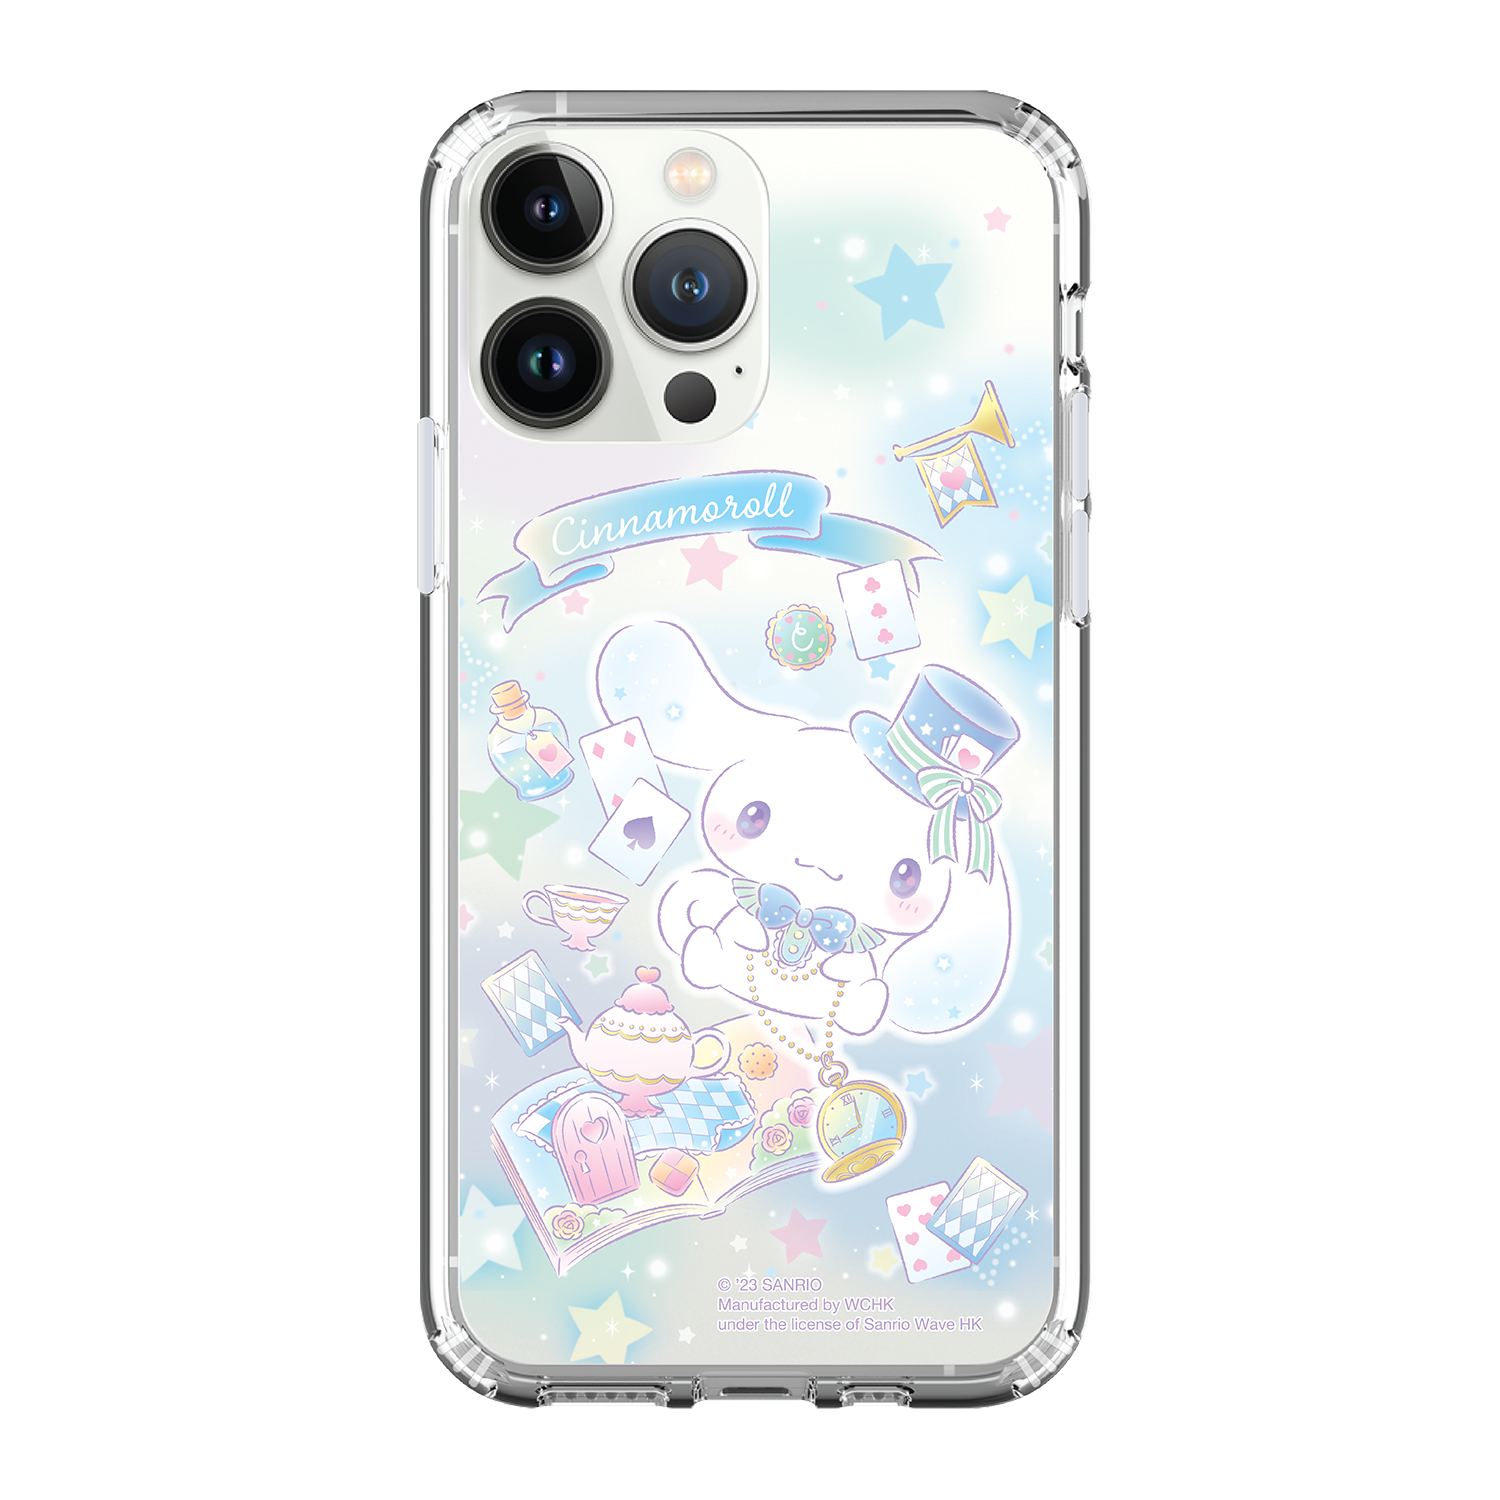 Cinnamoroll Clear Case / iPhone Case / Android Case / Samsung Case 防撞透明手機殼 (CN113)